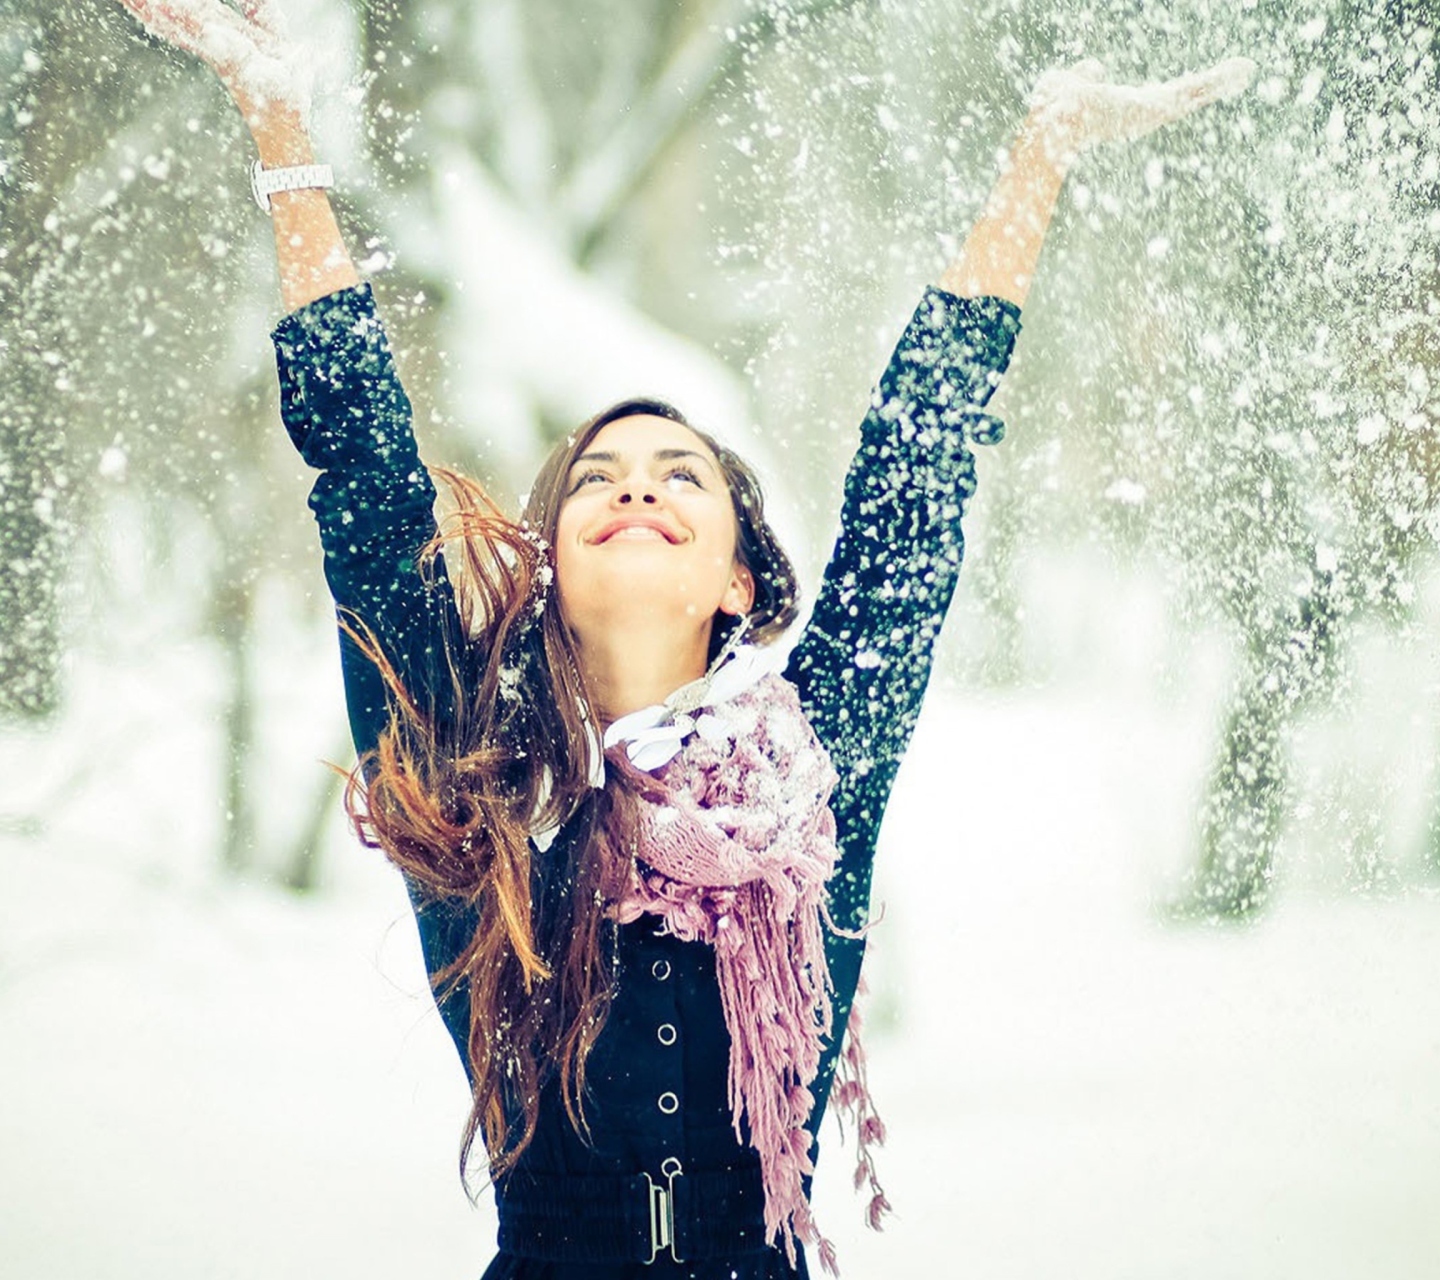 Winter, Snow And Happy Girl wallpaper 1440x1280